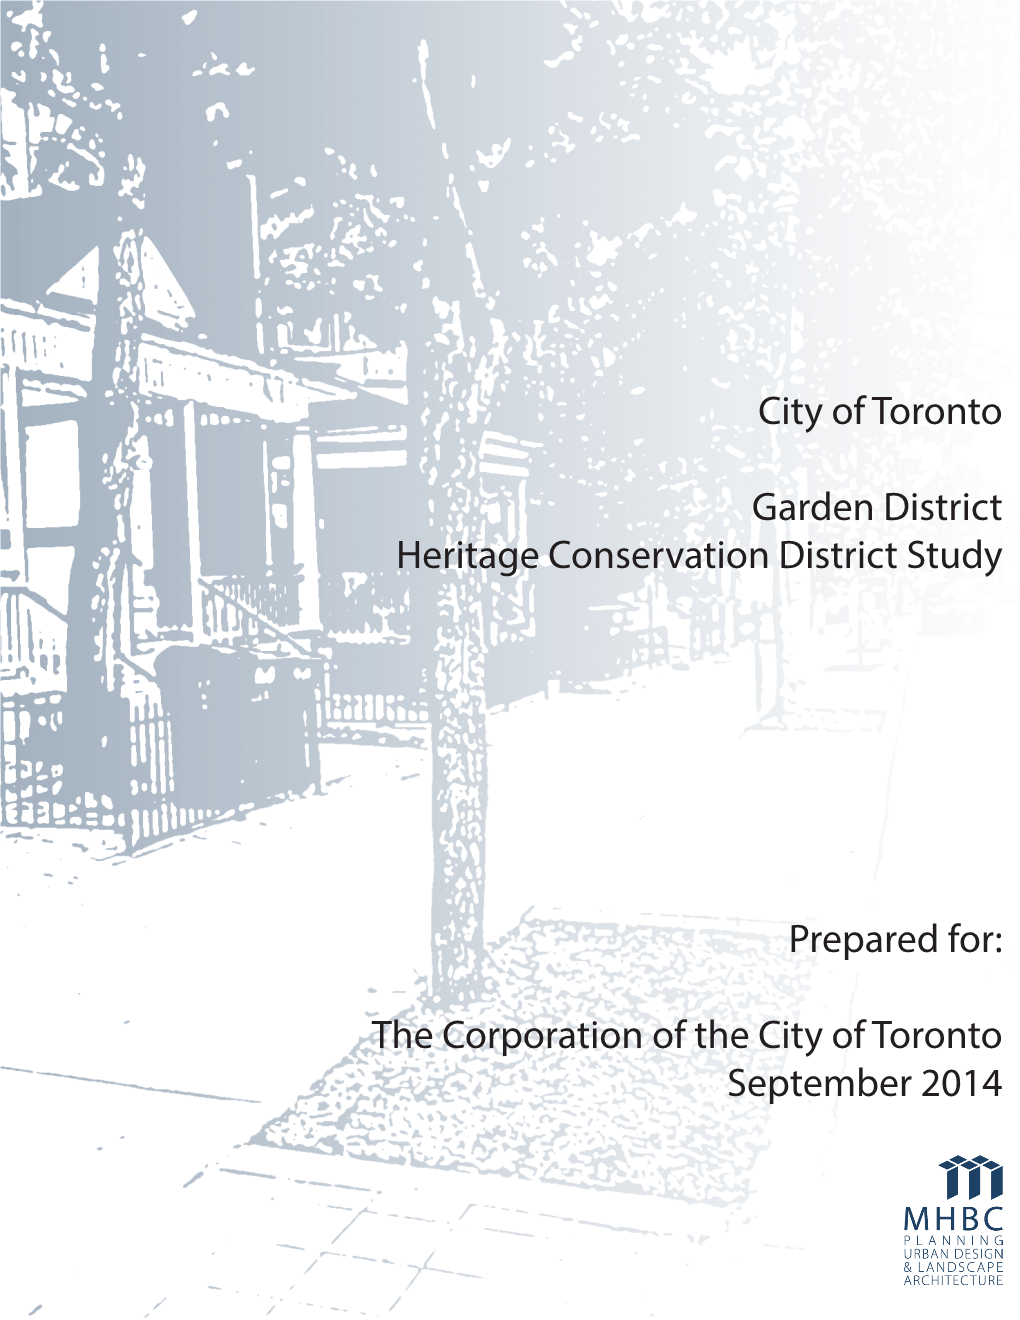 City of Toronto Garden District Heritage Conservation District